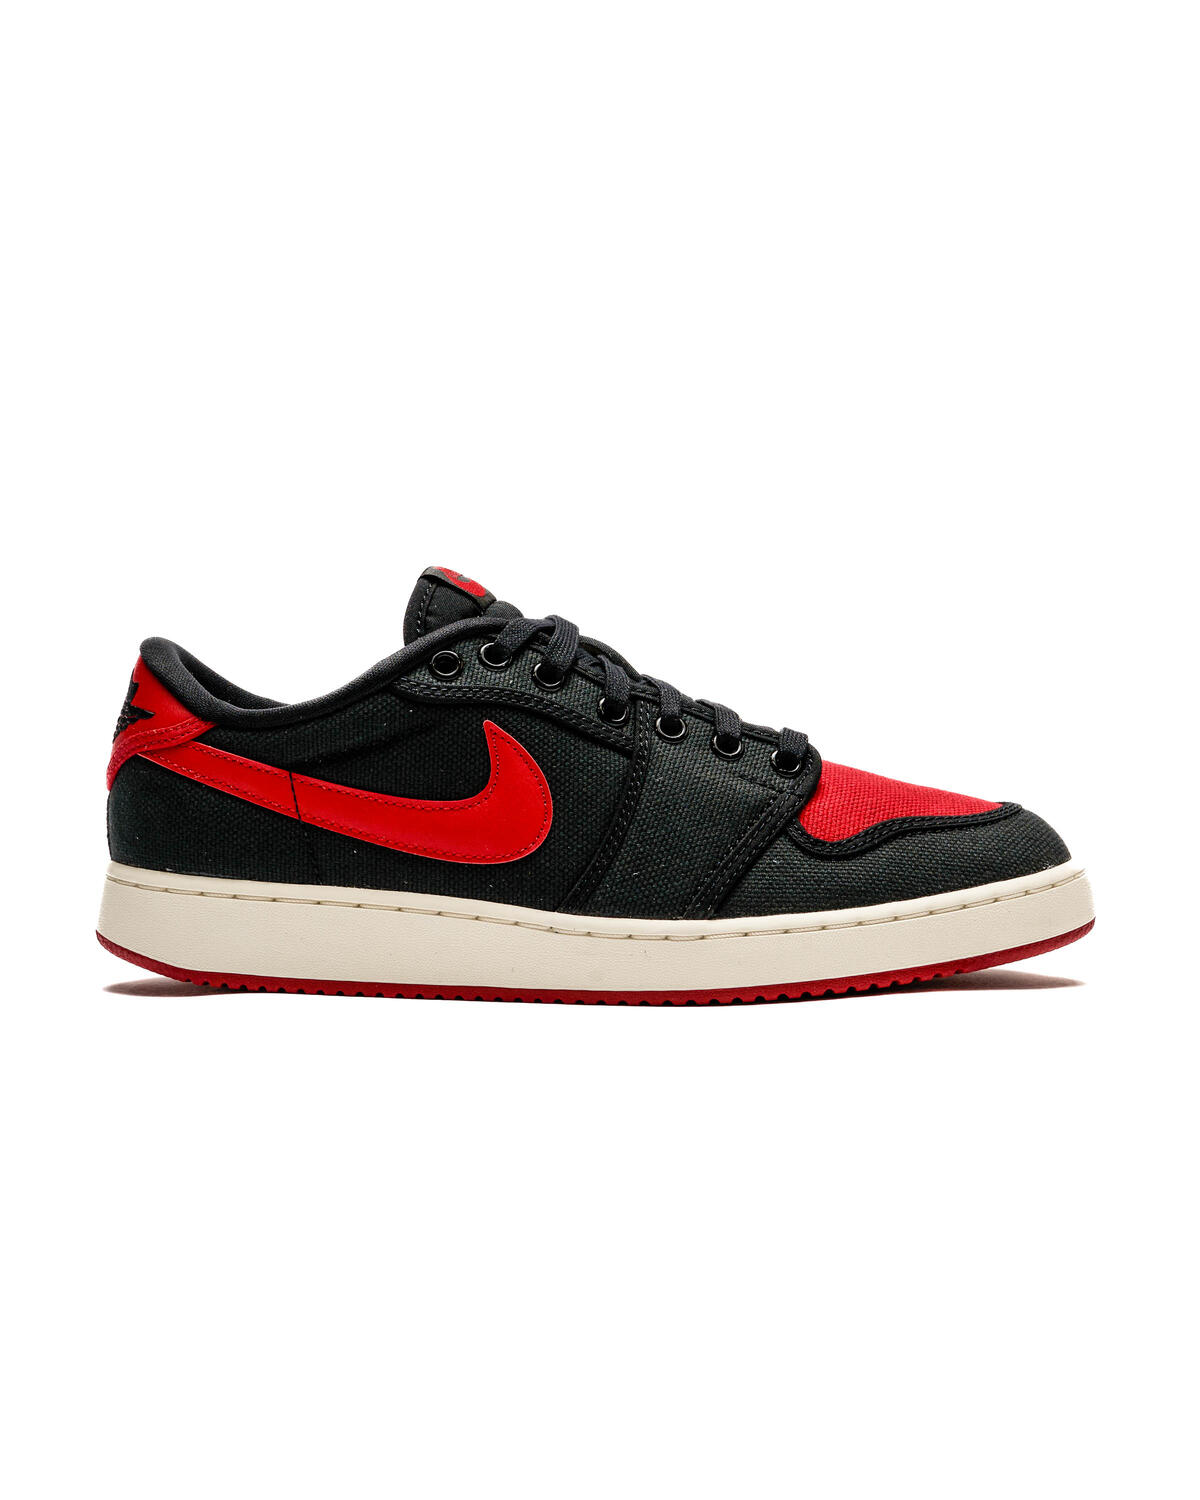 AFEW STORE on X: The Black Toe is one of the most famous and